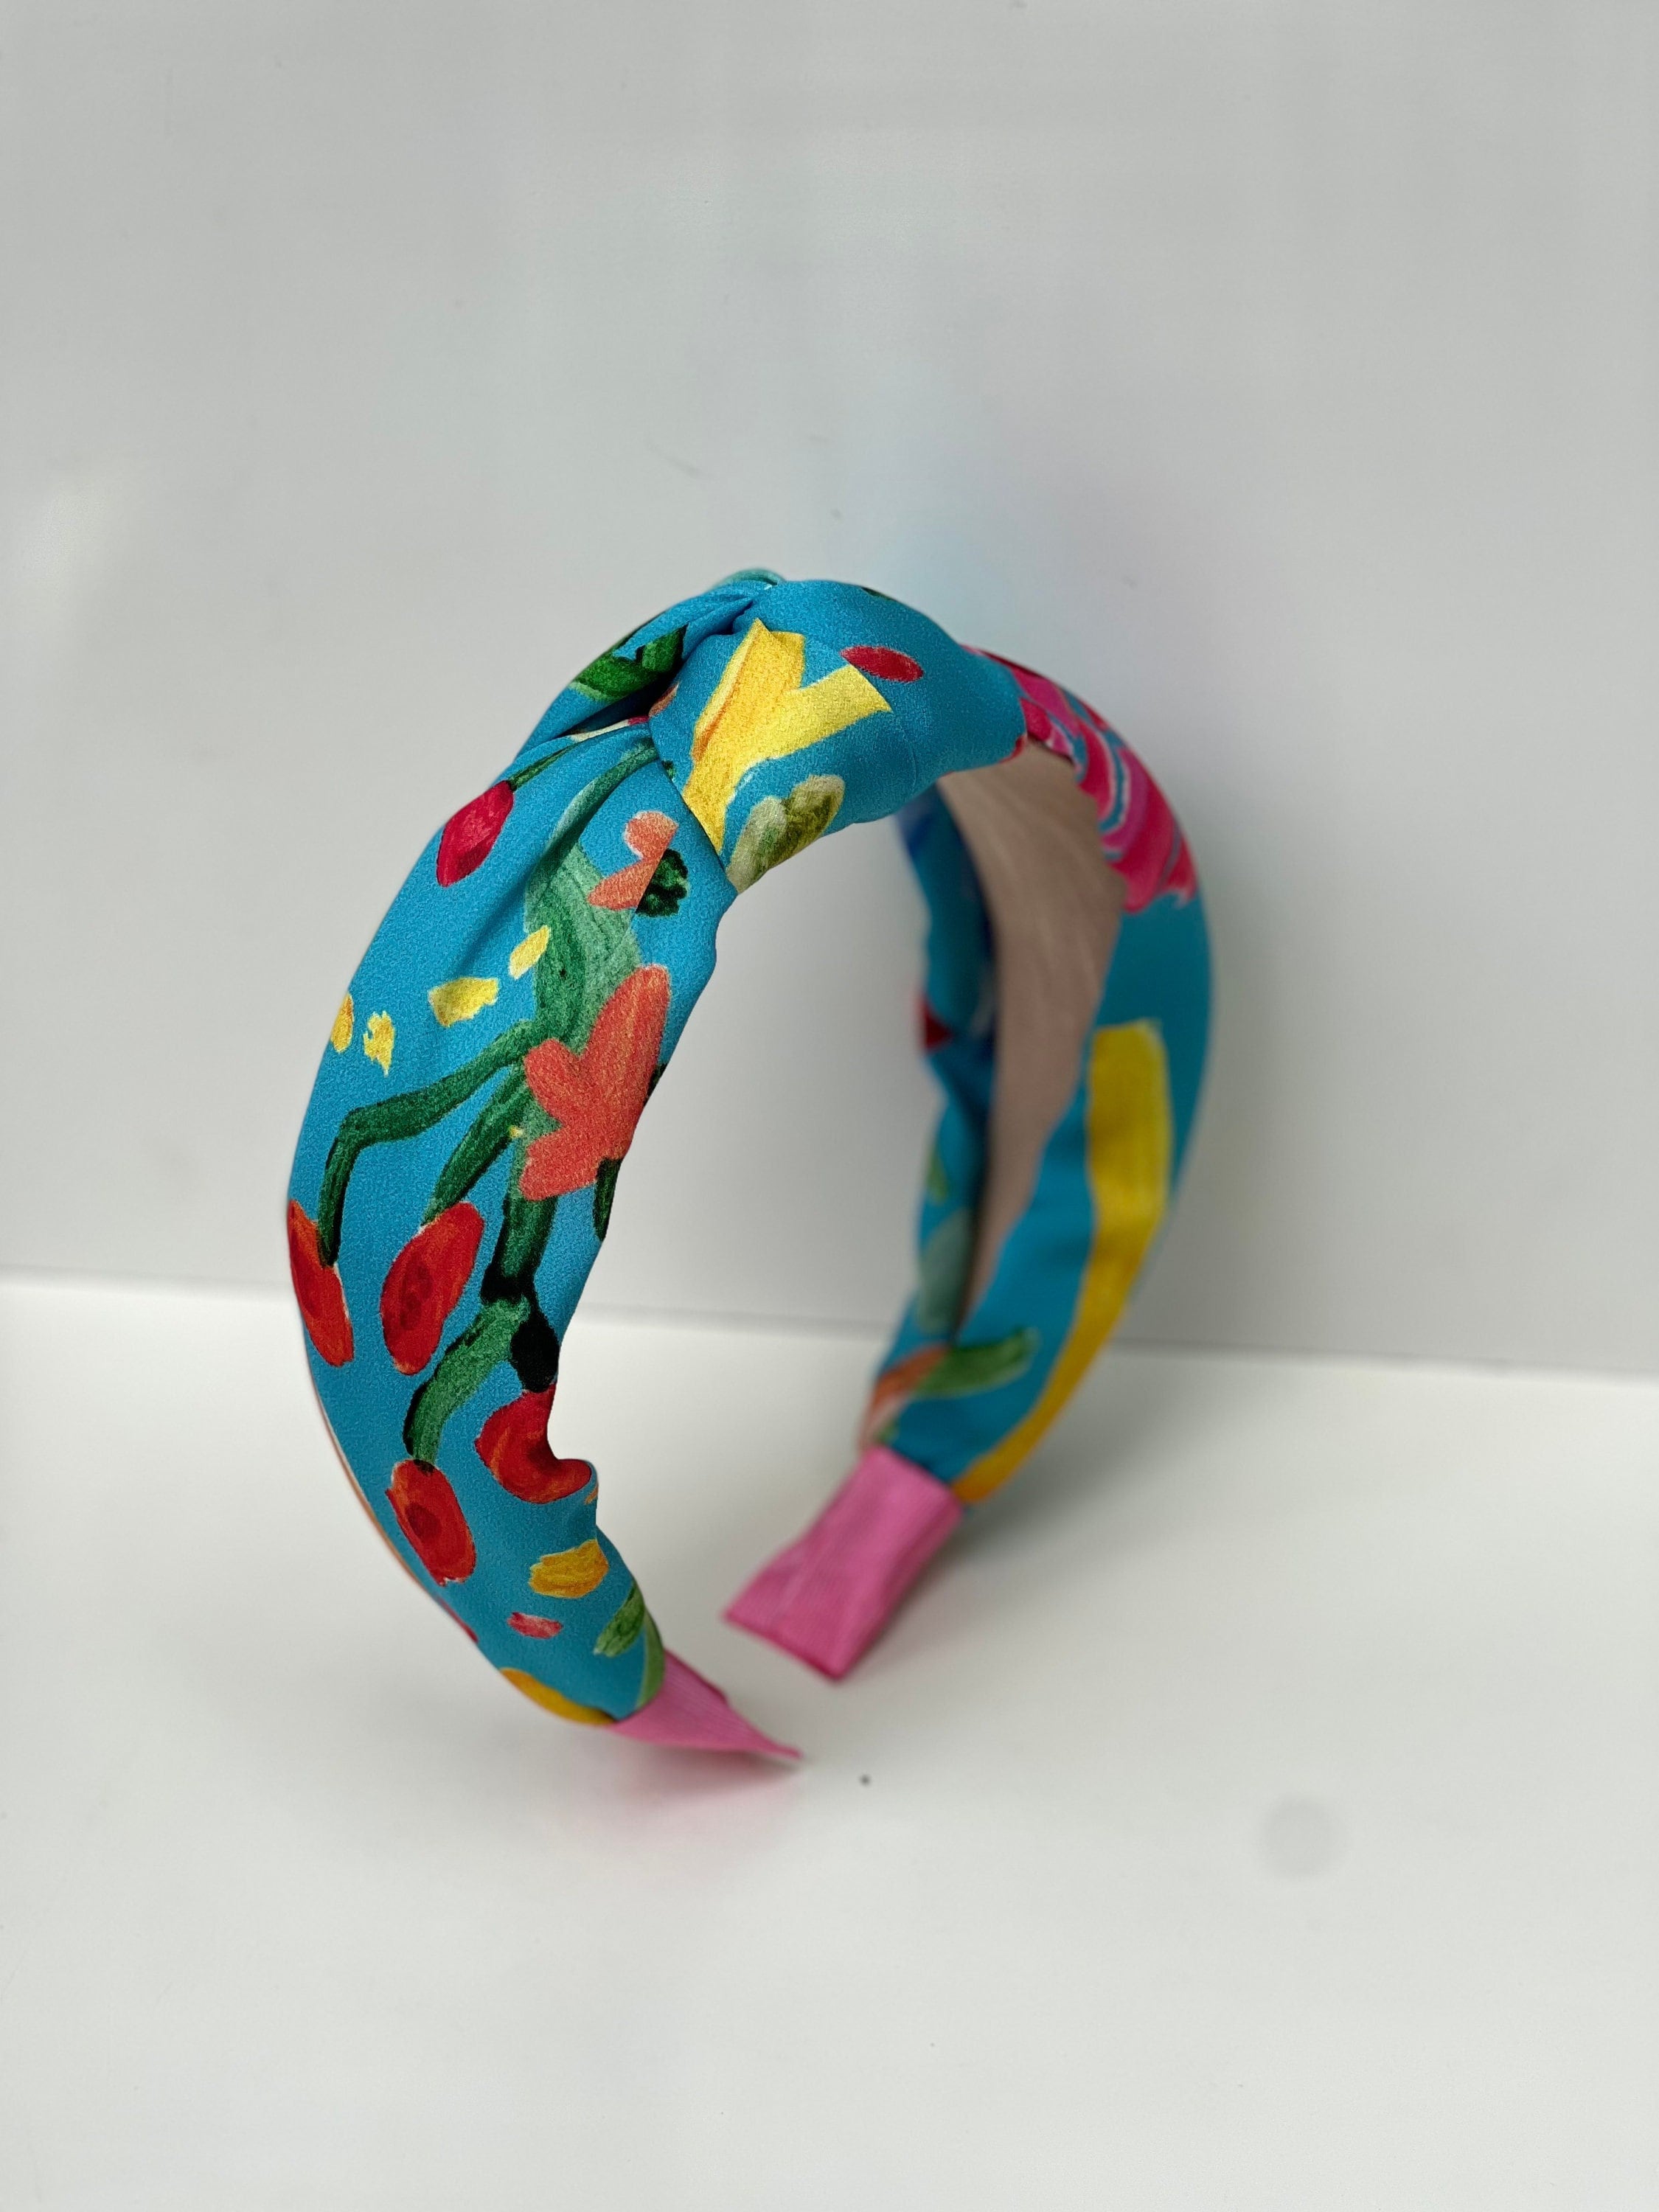 A multicolor knotted headband made of soft and durable fabric, perfect for women who love to accessorize their hair.